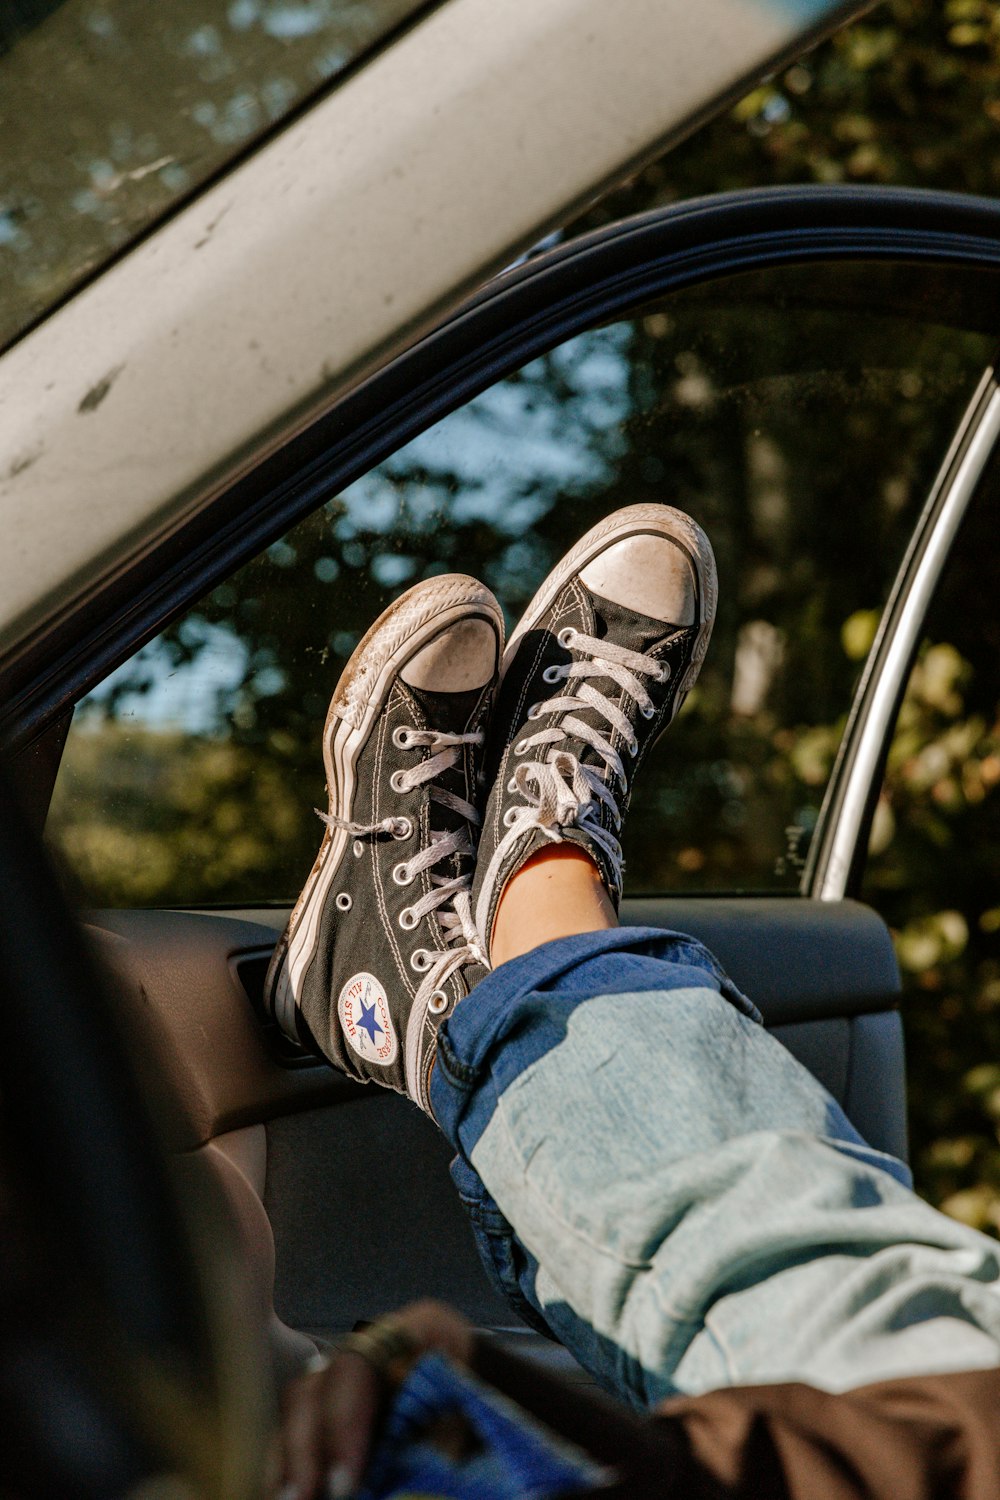 Mispend Avenue headache 100+ Converse Pictures | Download Free Images & Stock Photos on Unsplash